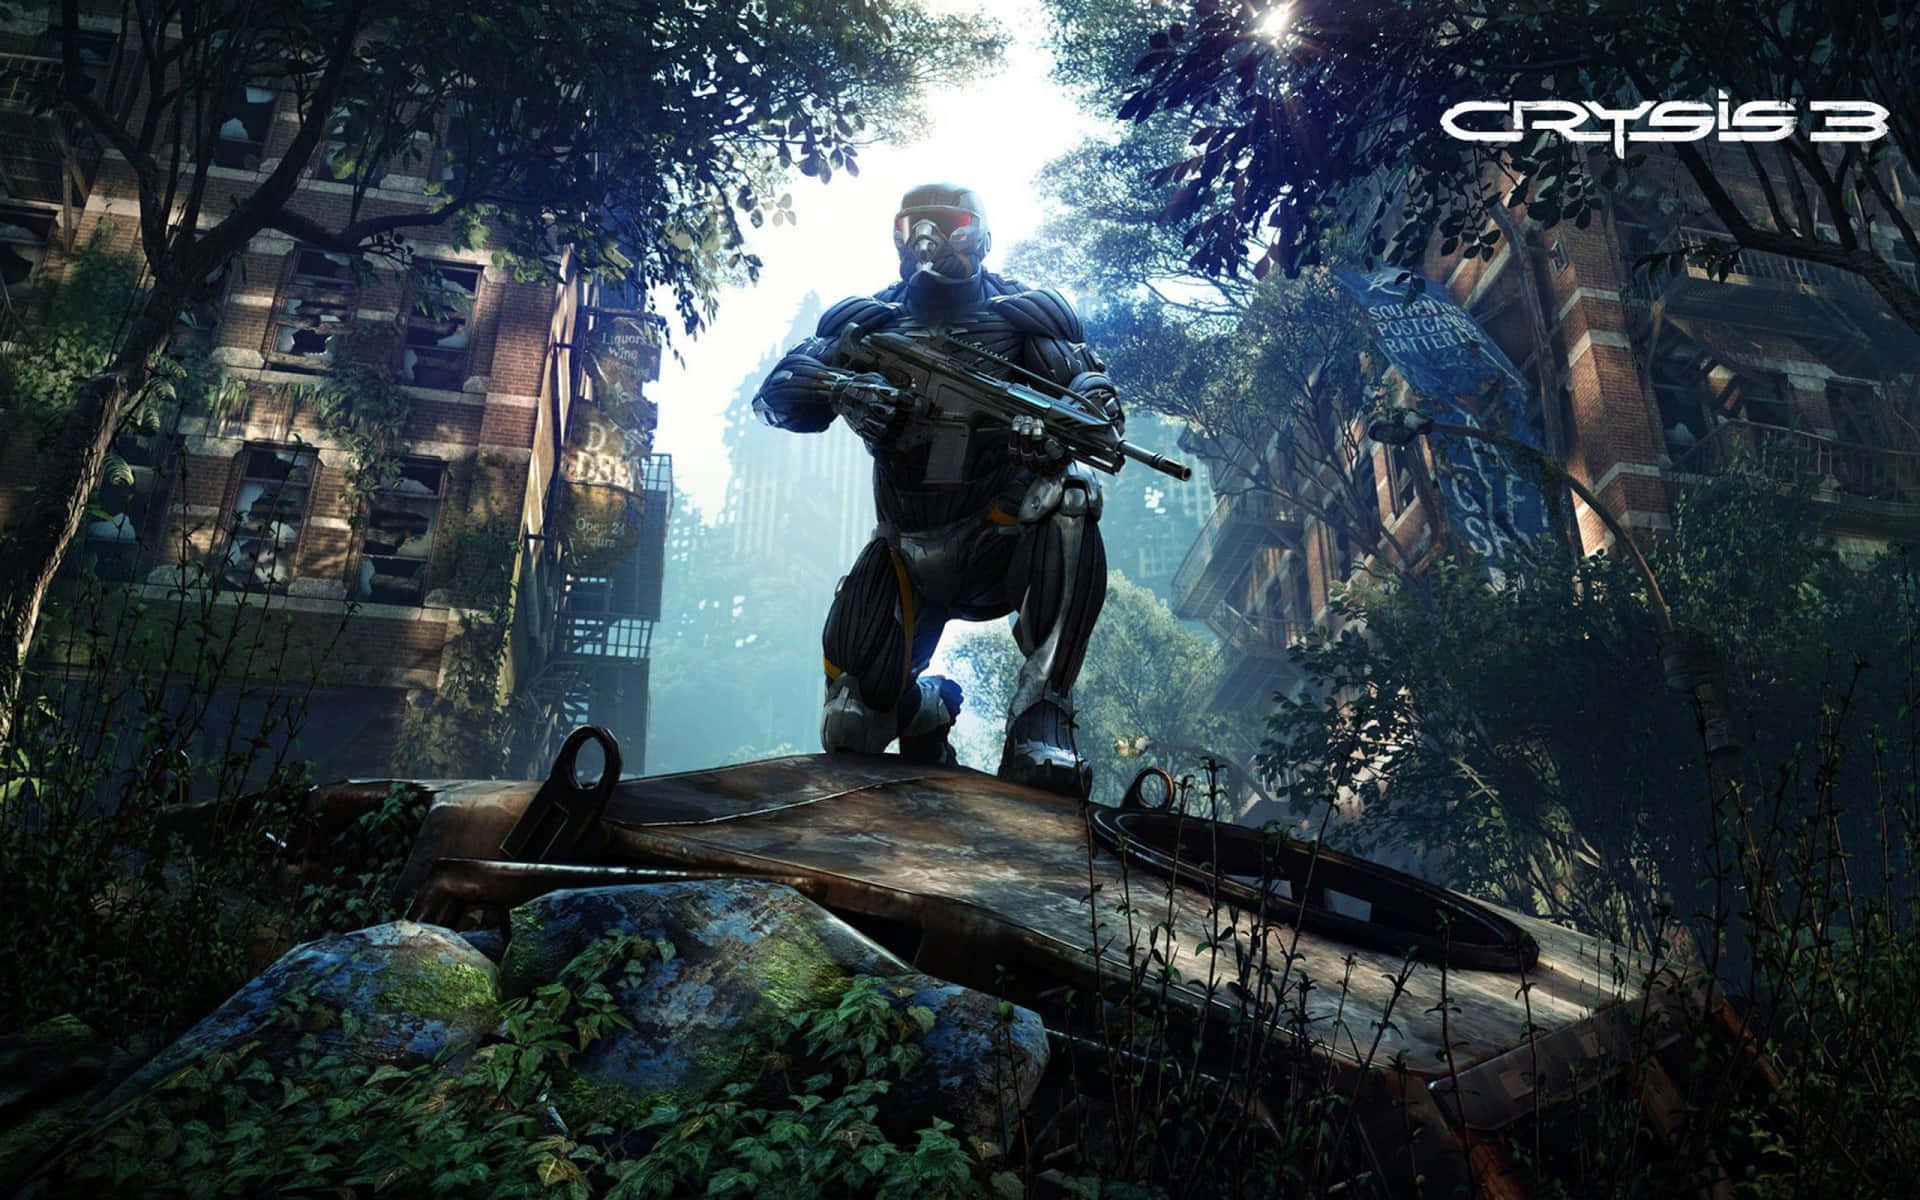 Witness The Action In Immersive 4k With Crysis